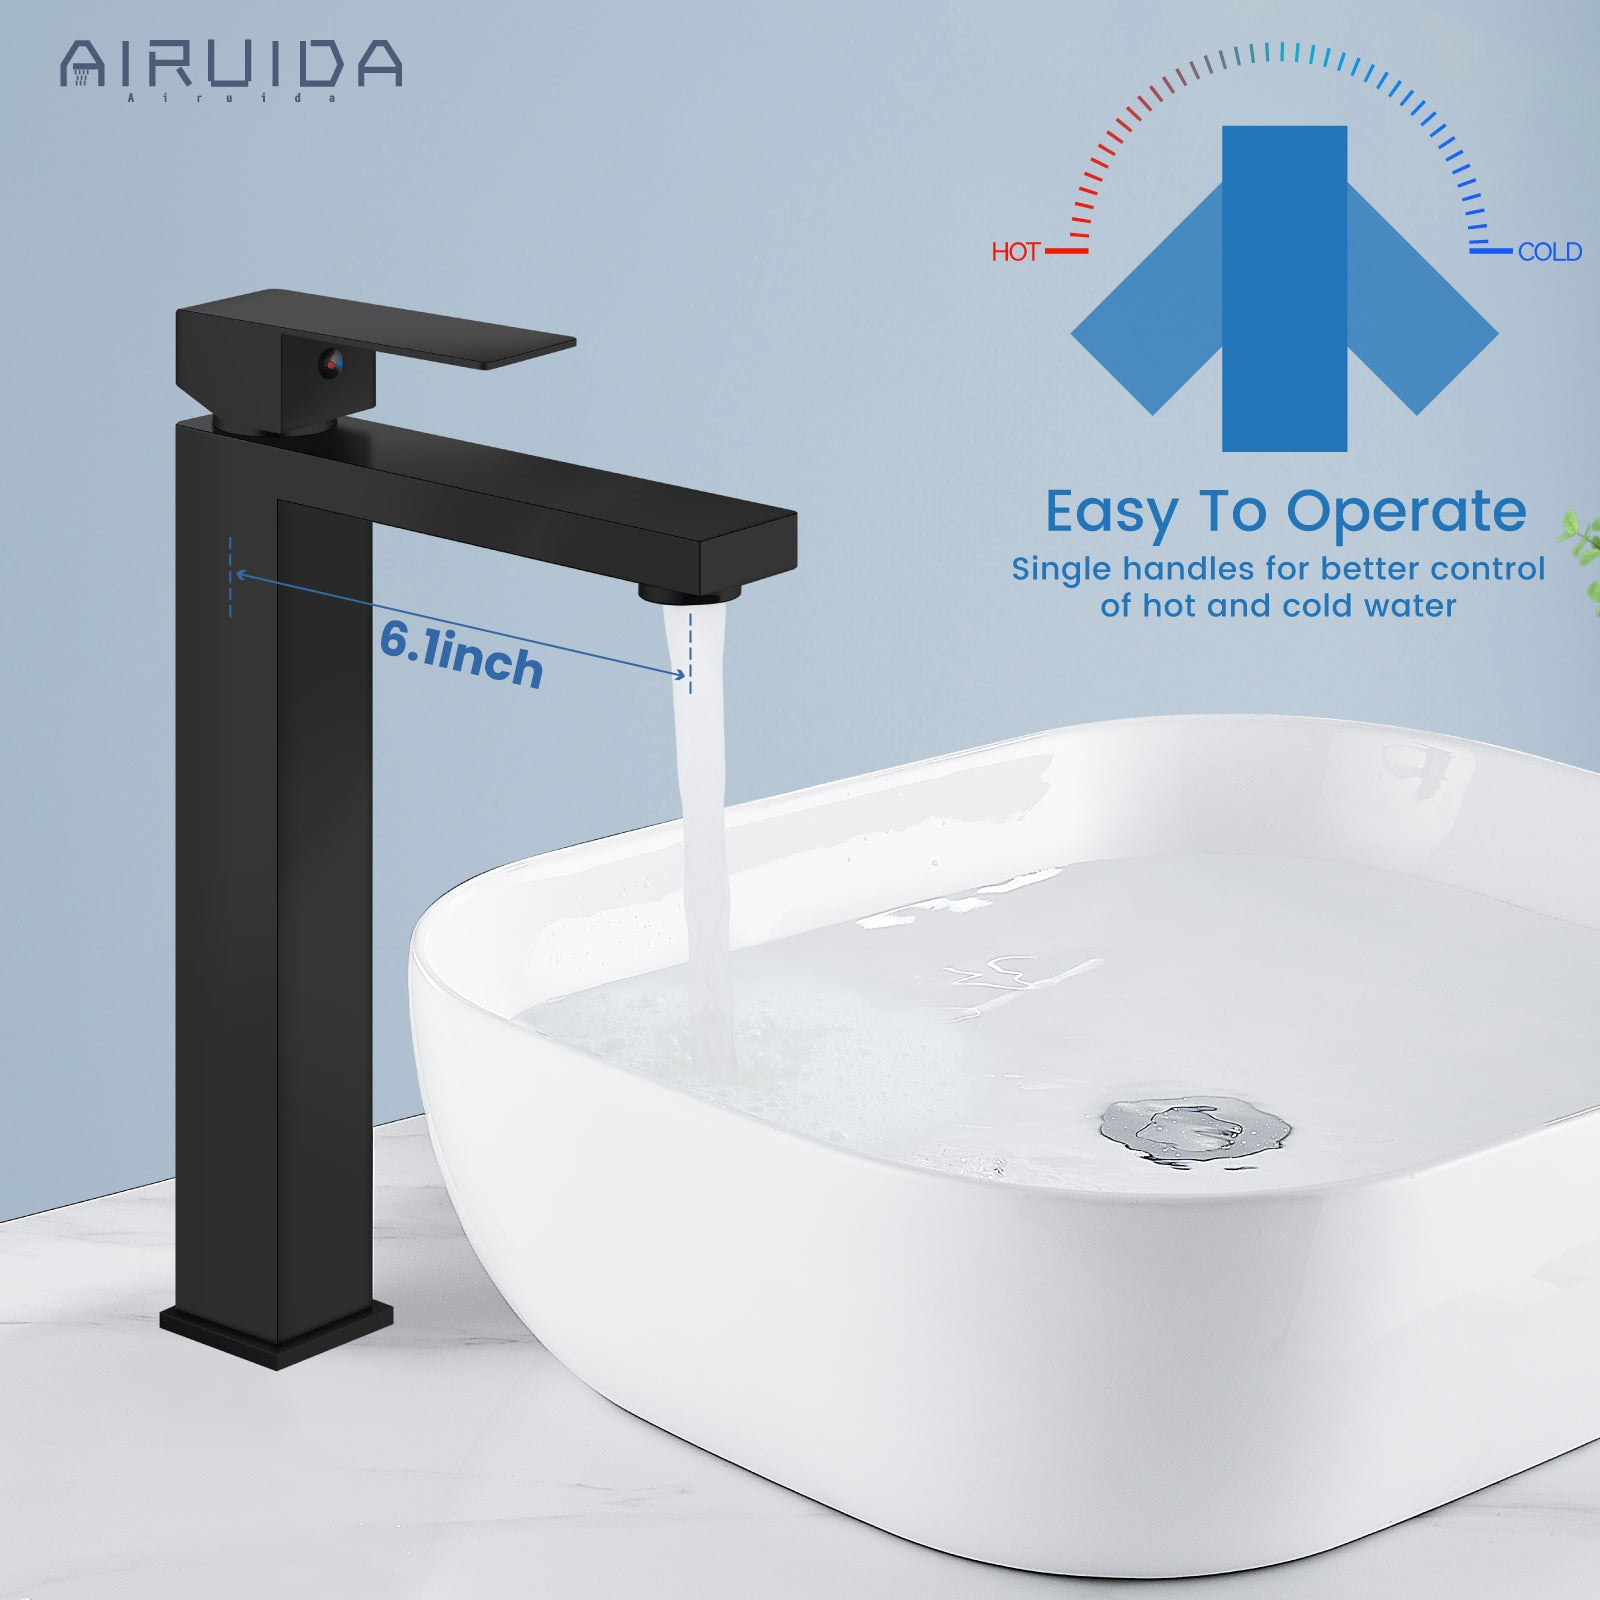 Airuida Single Handle Vessel Sink Faucet,Tall Bathroom Sinks Faucet,1 Hole Lavatory Modern Faucet for Bowl Sink,Vanity Mixer Bar Tap with Water Supply Hoses Deck Mount Square Spout